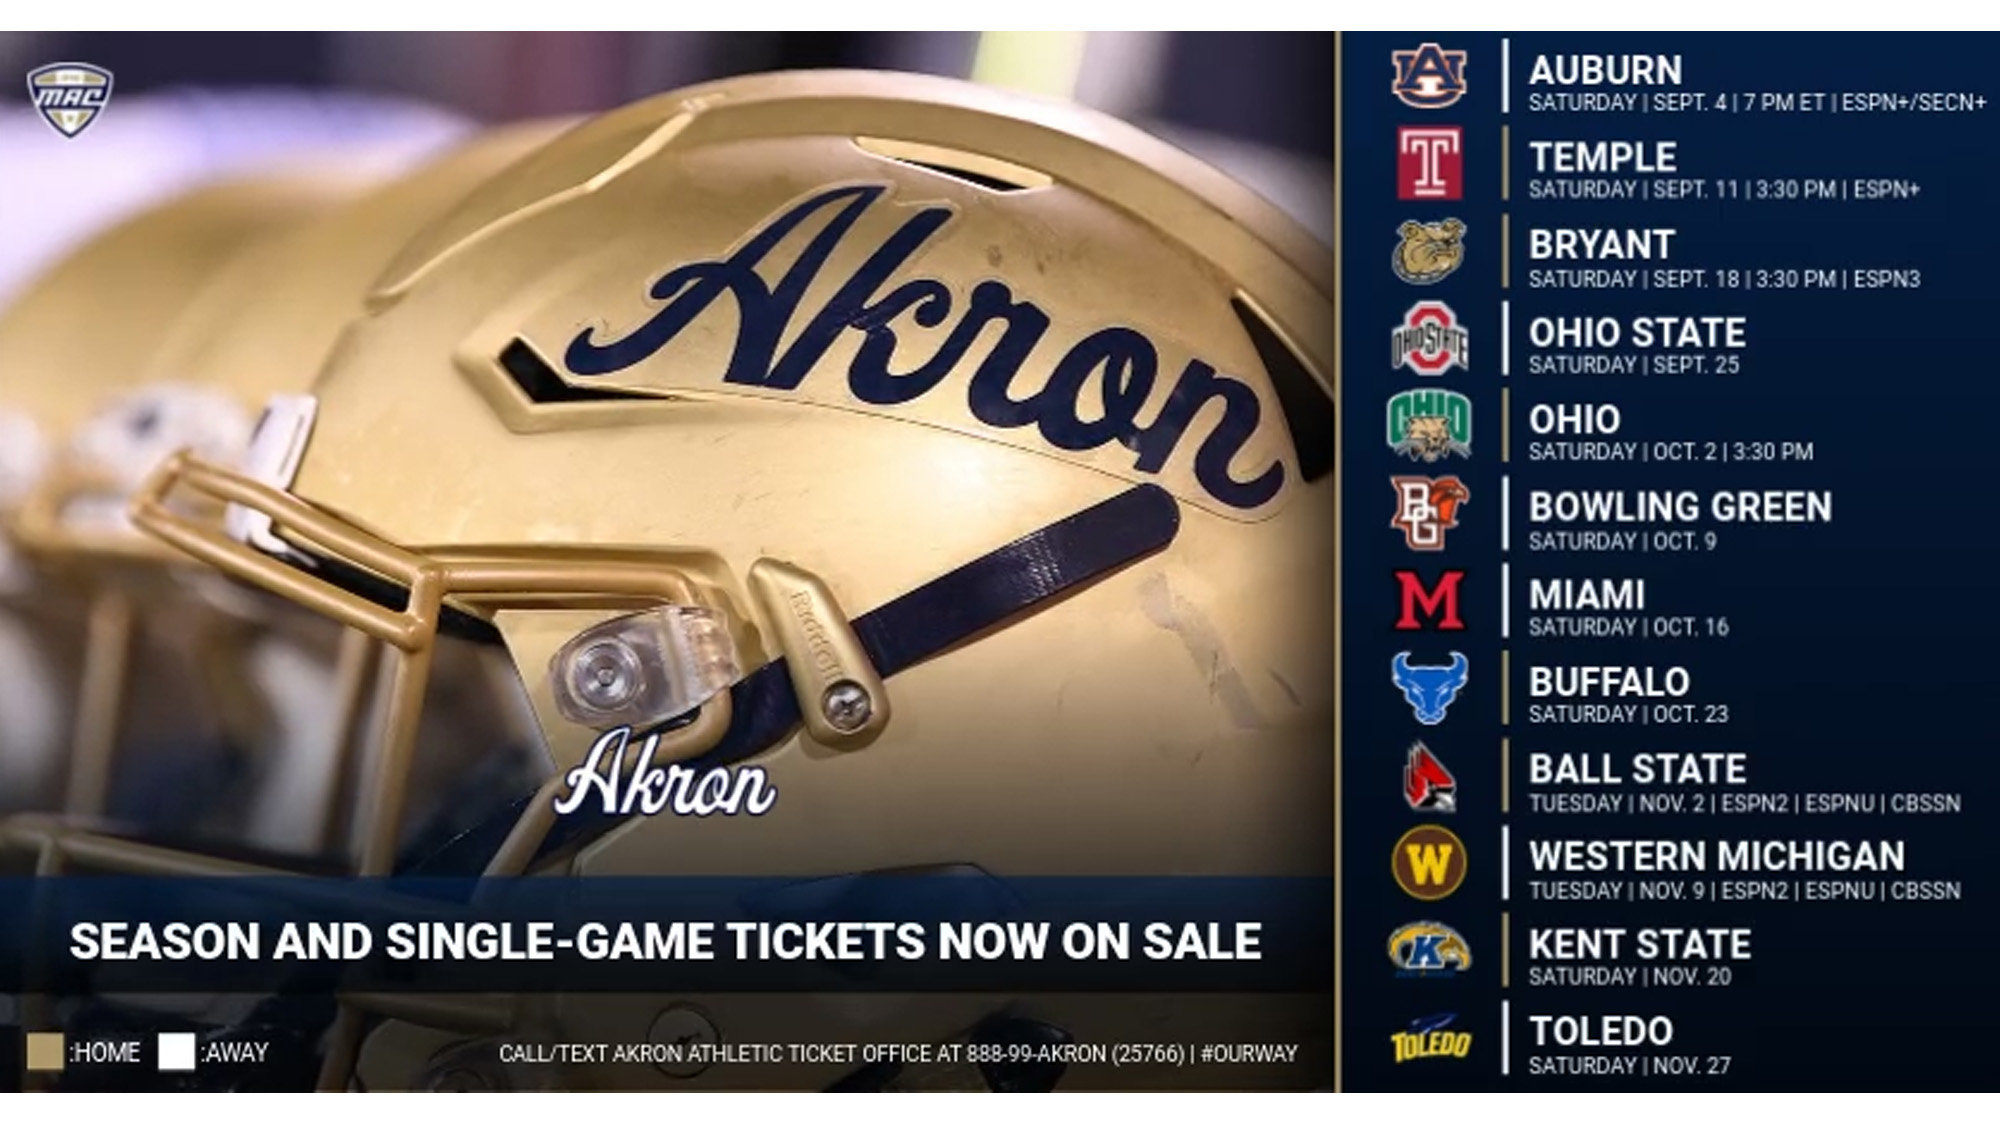 Akron Football on X: "@ZipsFB season ticket plans, which include a ticket  to all six home games, and single-game tickets for the 2021 season, can be  purchased now by calling or texting